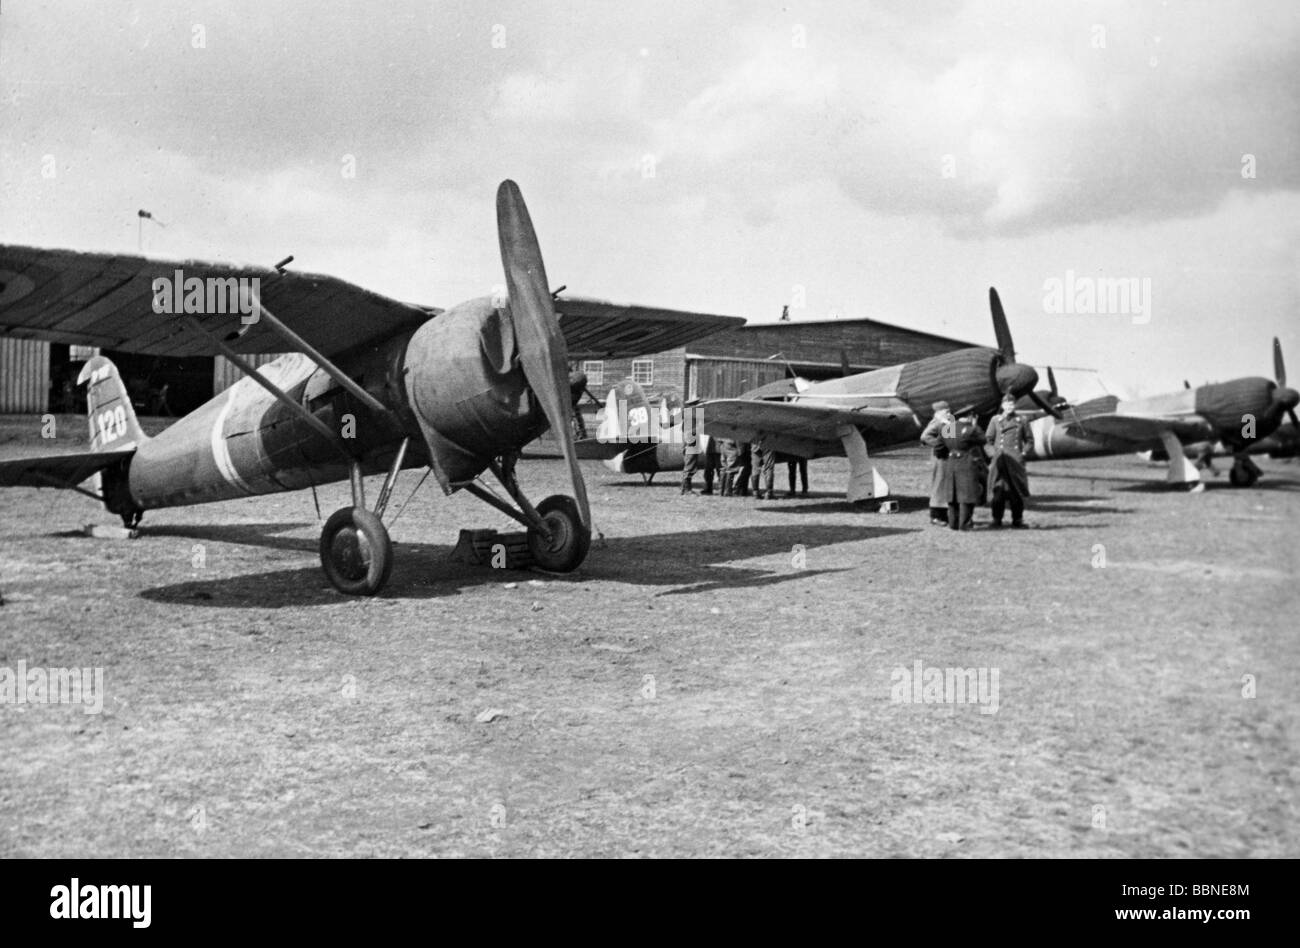 events, Second World War / WWII, aerial warfare, aircraft, an airfield of the Rumanian Air Force during the Balkans Campaign or the war against the Soviet Union, 1941, in the foreground a fighter PZL 11 (Polish origin), in the background two IAR-80 fighter planes, Stock Photo